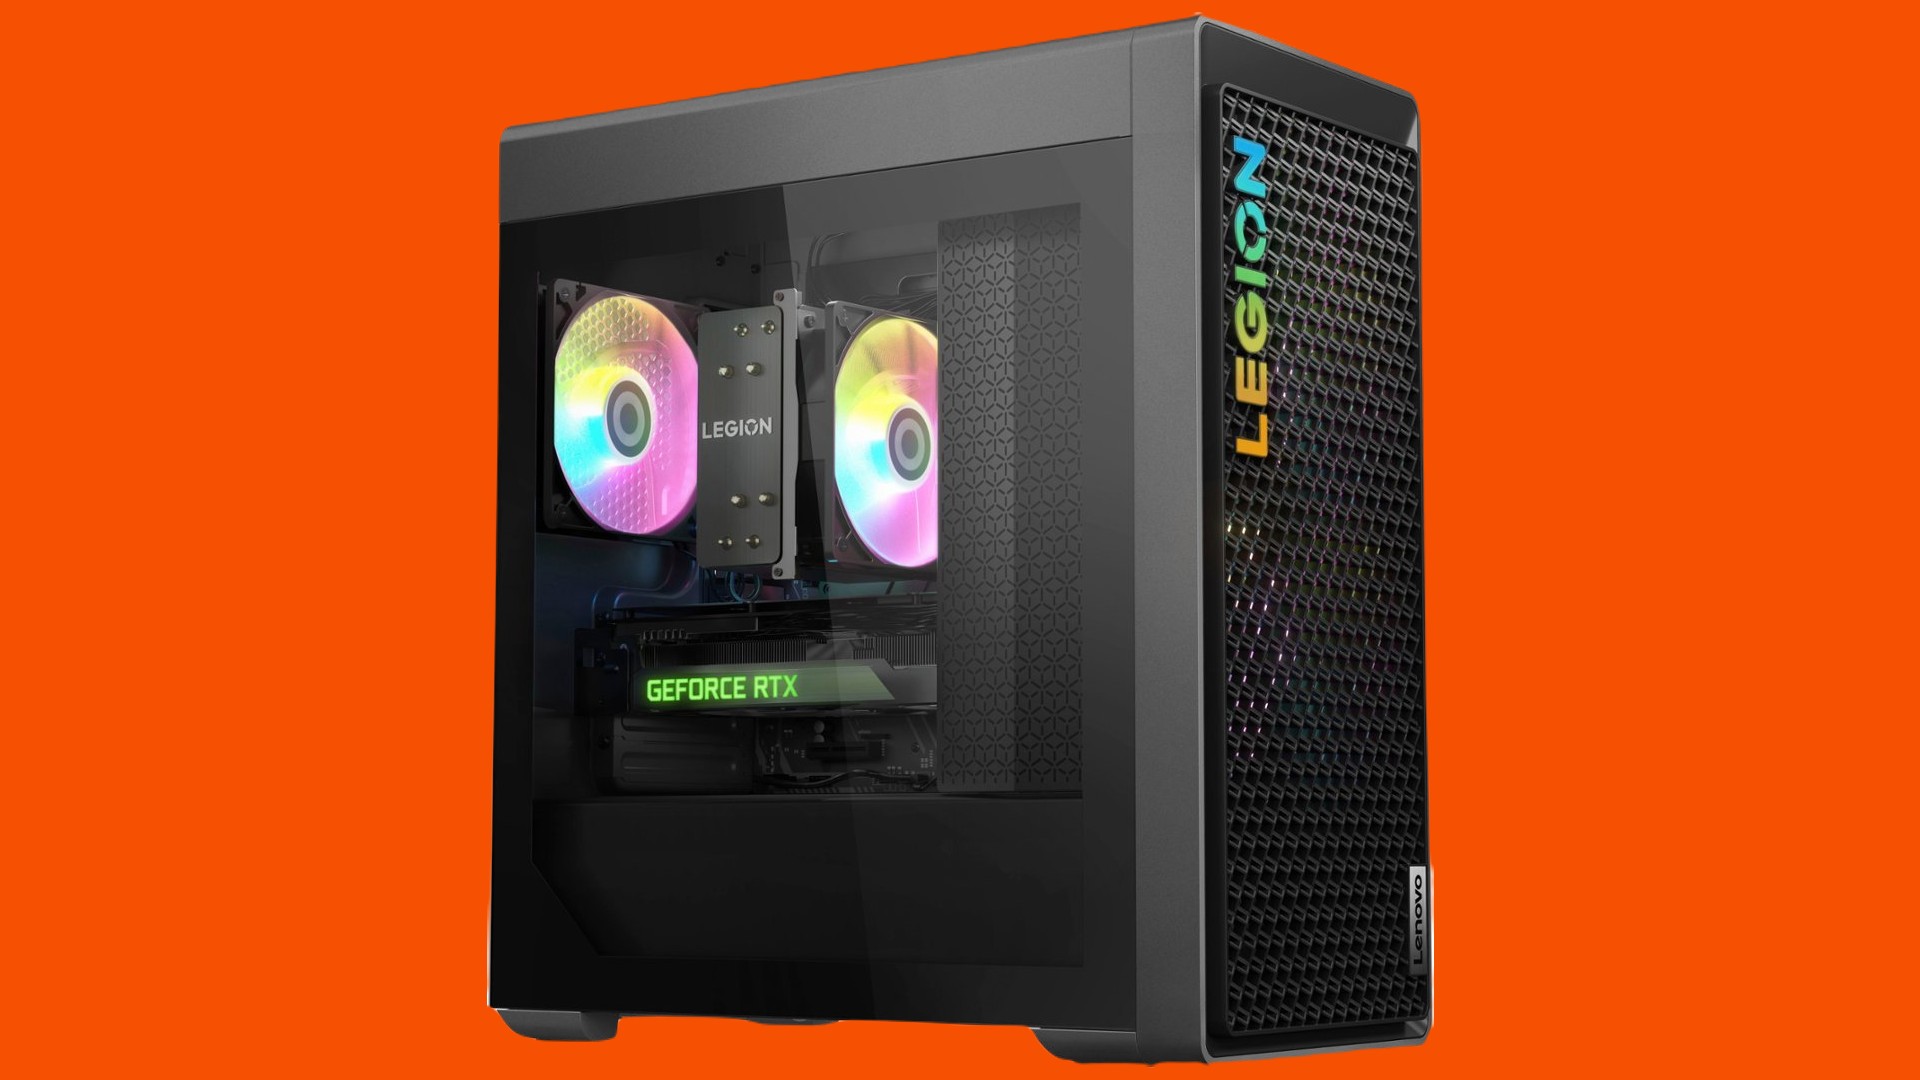 Save $600 in this Nvidia RTX 4070 gaming PC deal, thanks to Best Buy